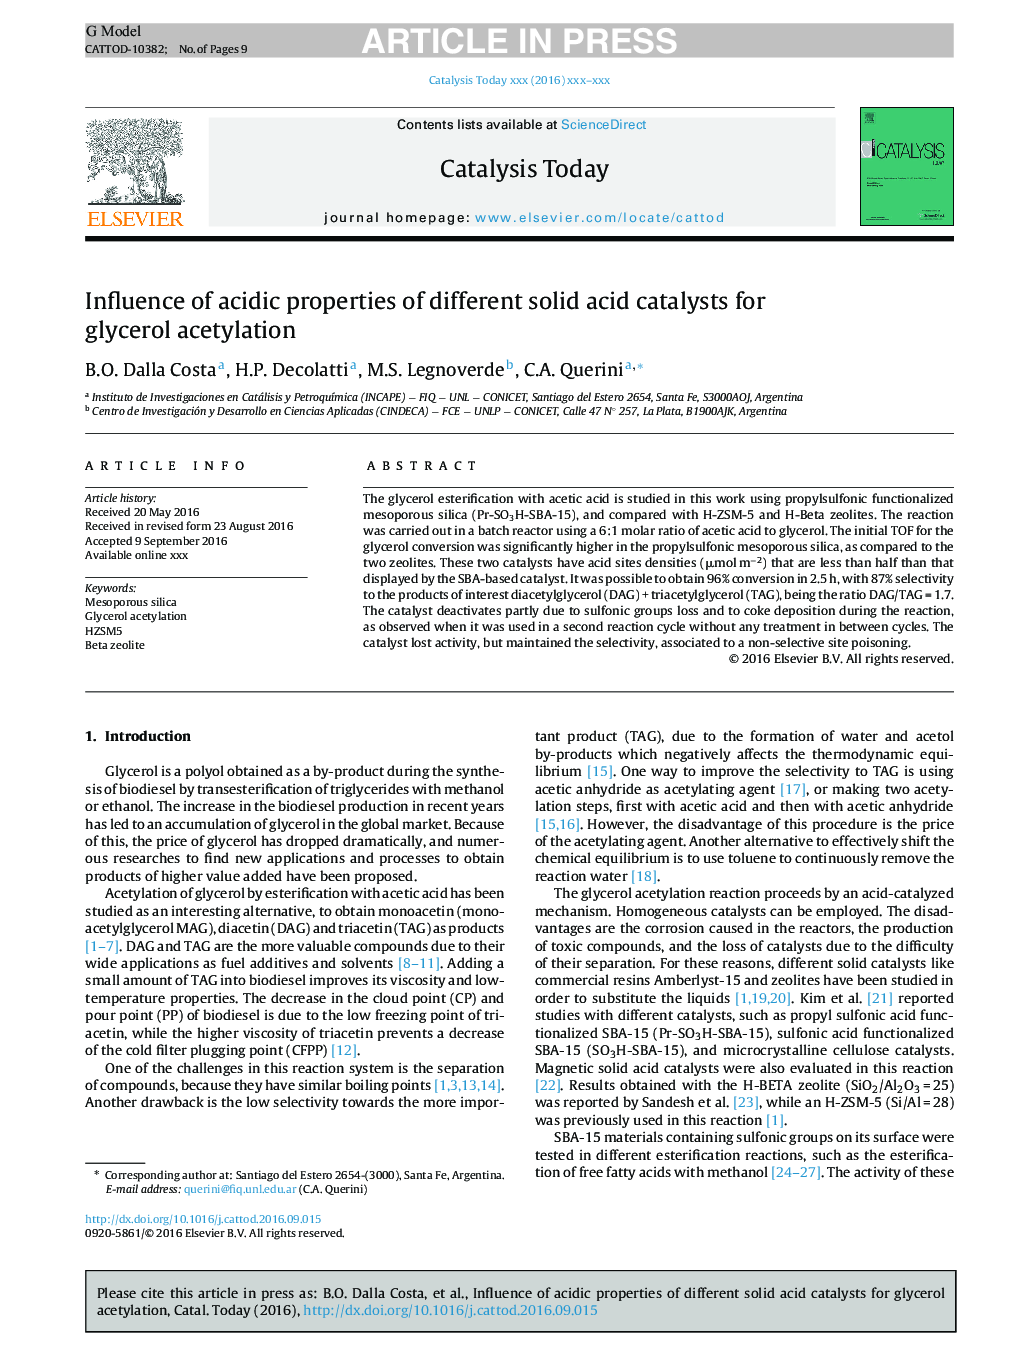 Influence of acidic properties of different solid acid catalysts for glycerol acetylation